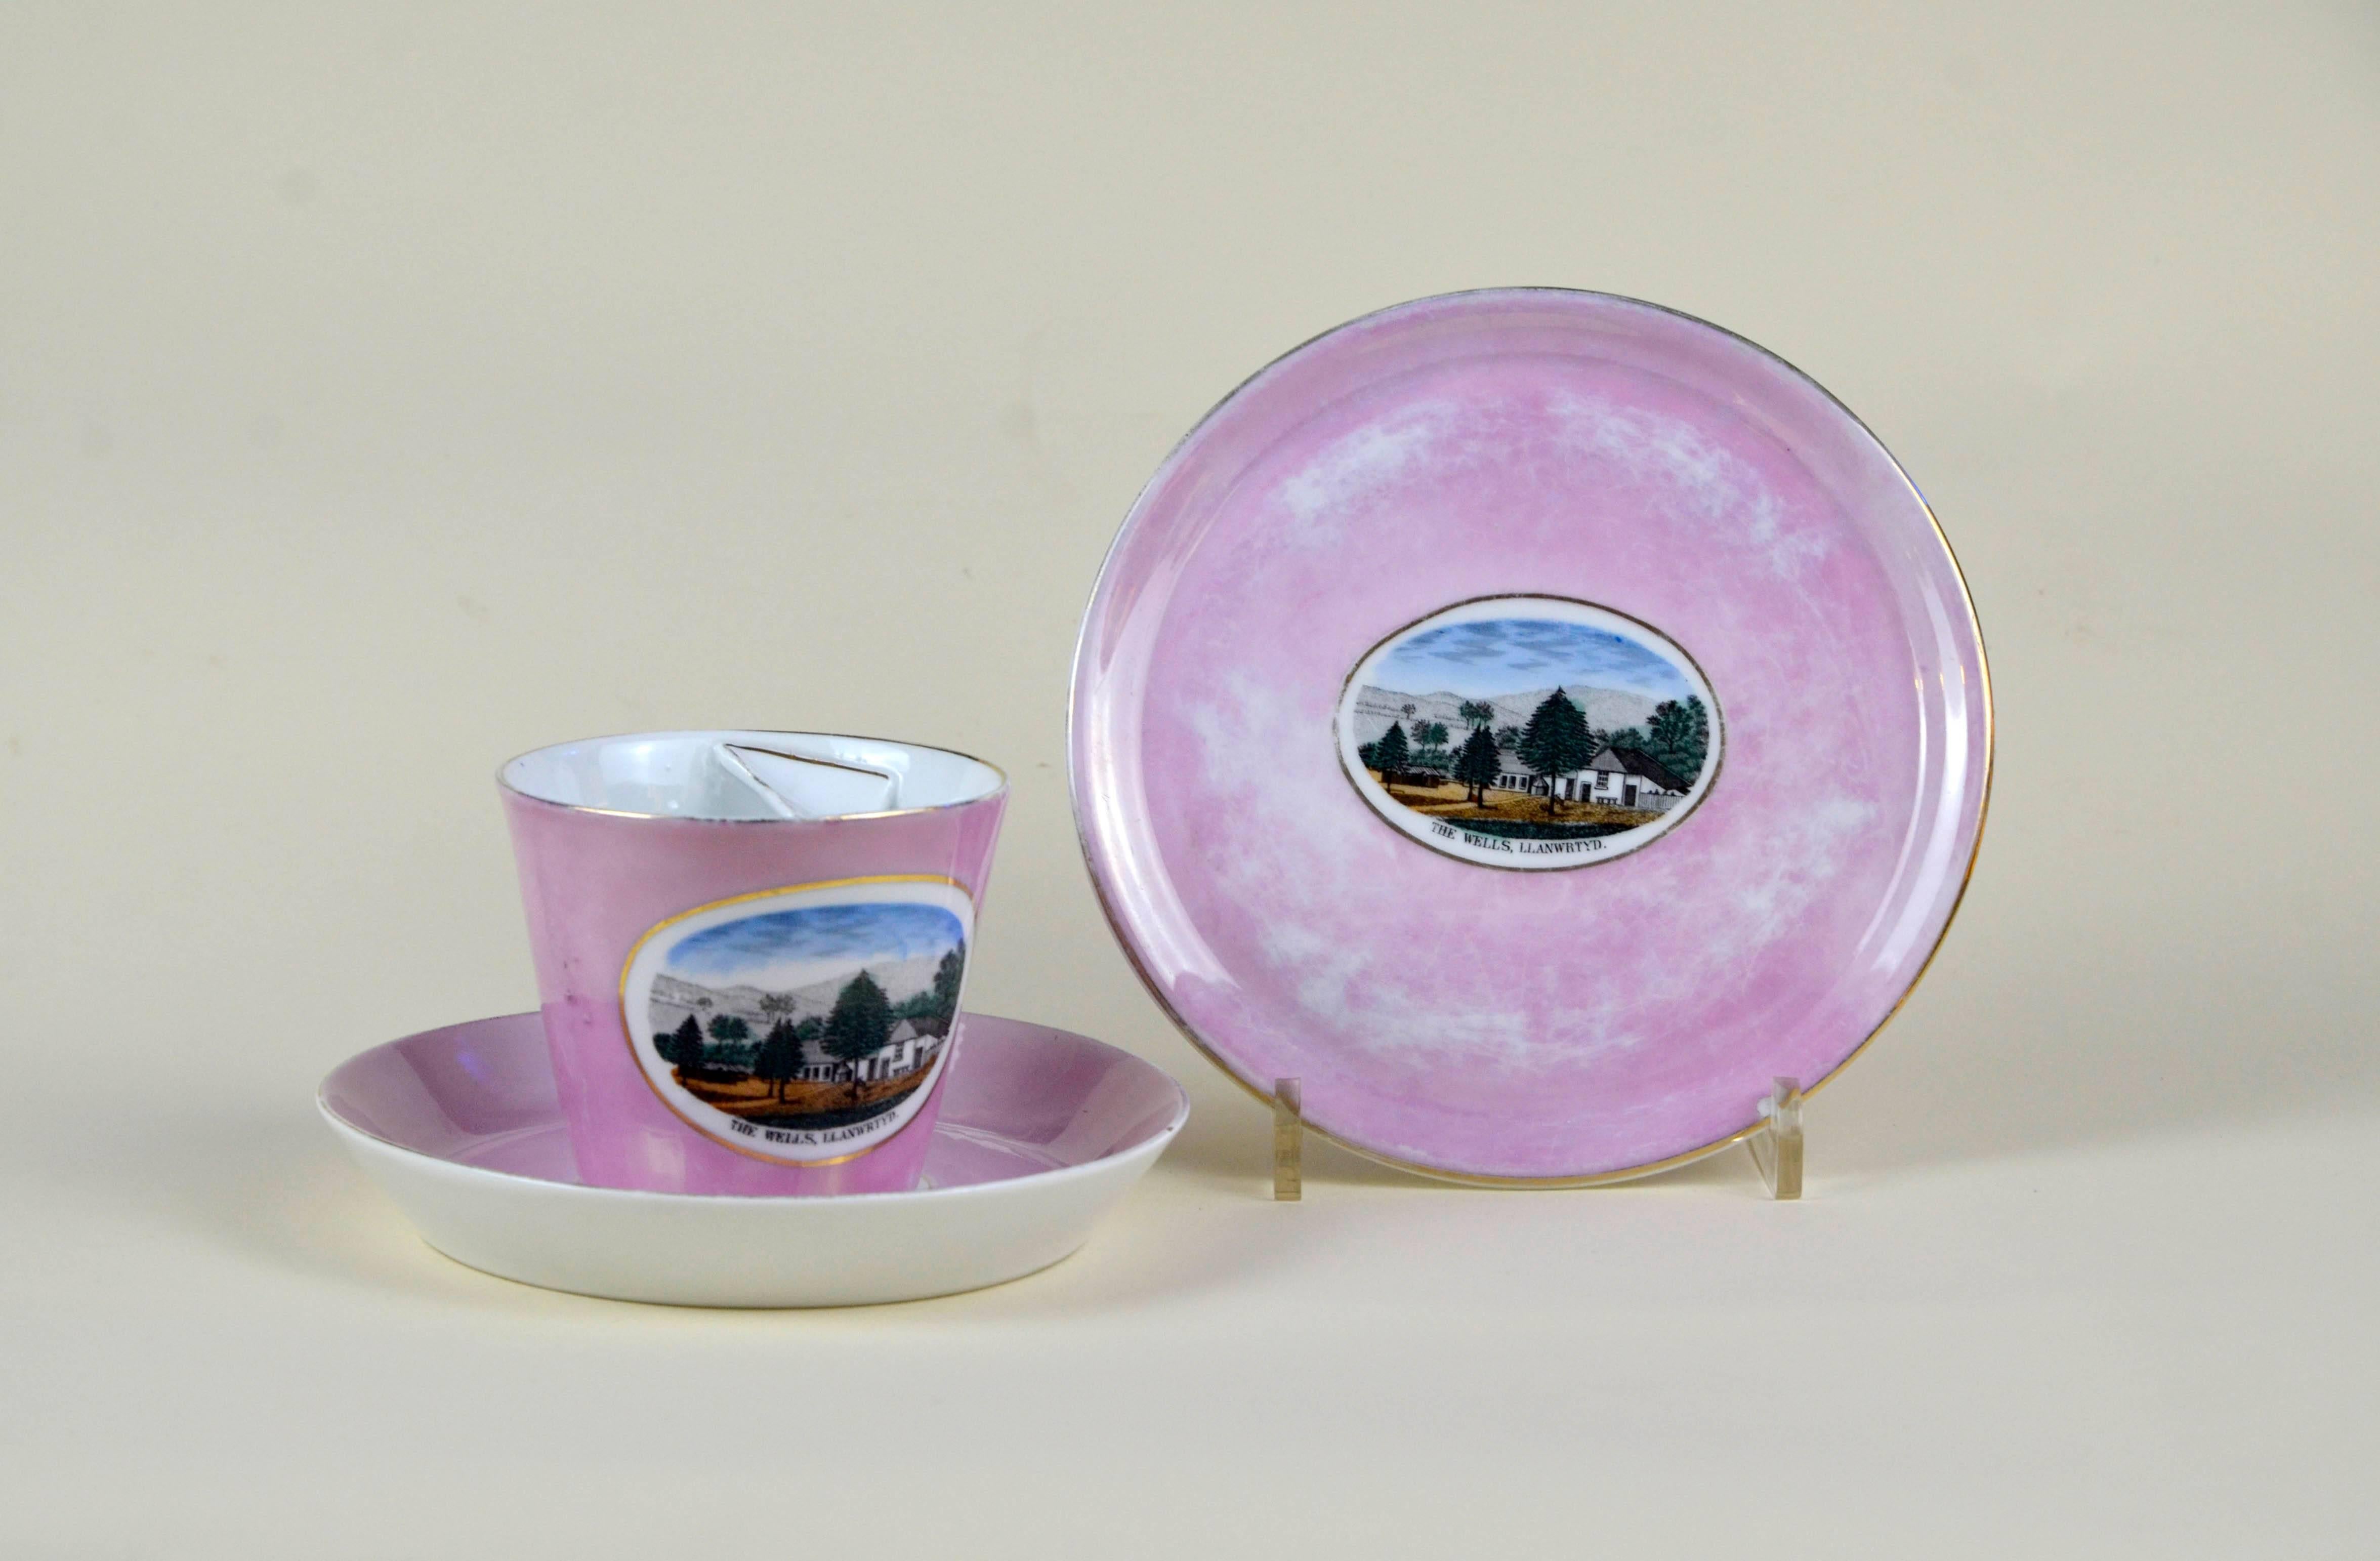 German porcelain souvenir mustache cup finished in an antique pink lustre glaze with two sauces. The cup and the larger saucer are bearing a polychrome image of Llanwrtyd Wells and are marked Made in Germany. Excellent condition with no chips or